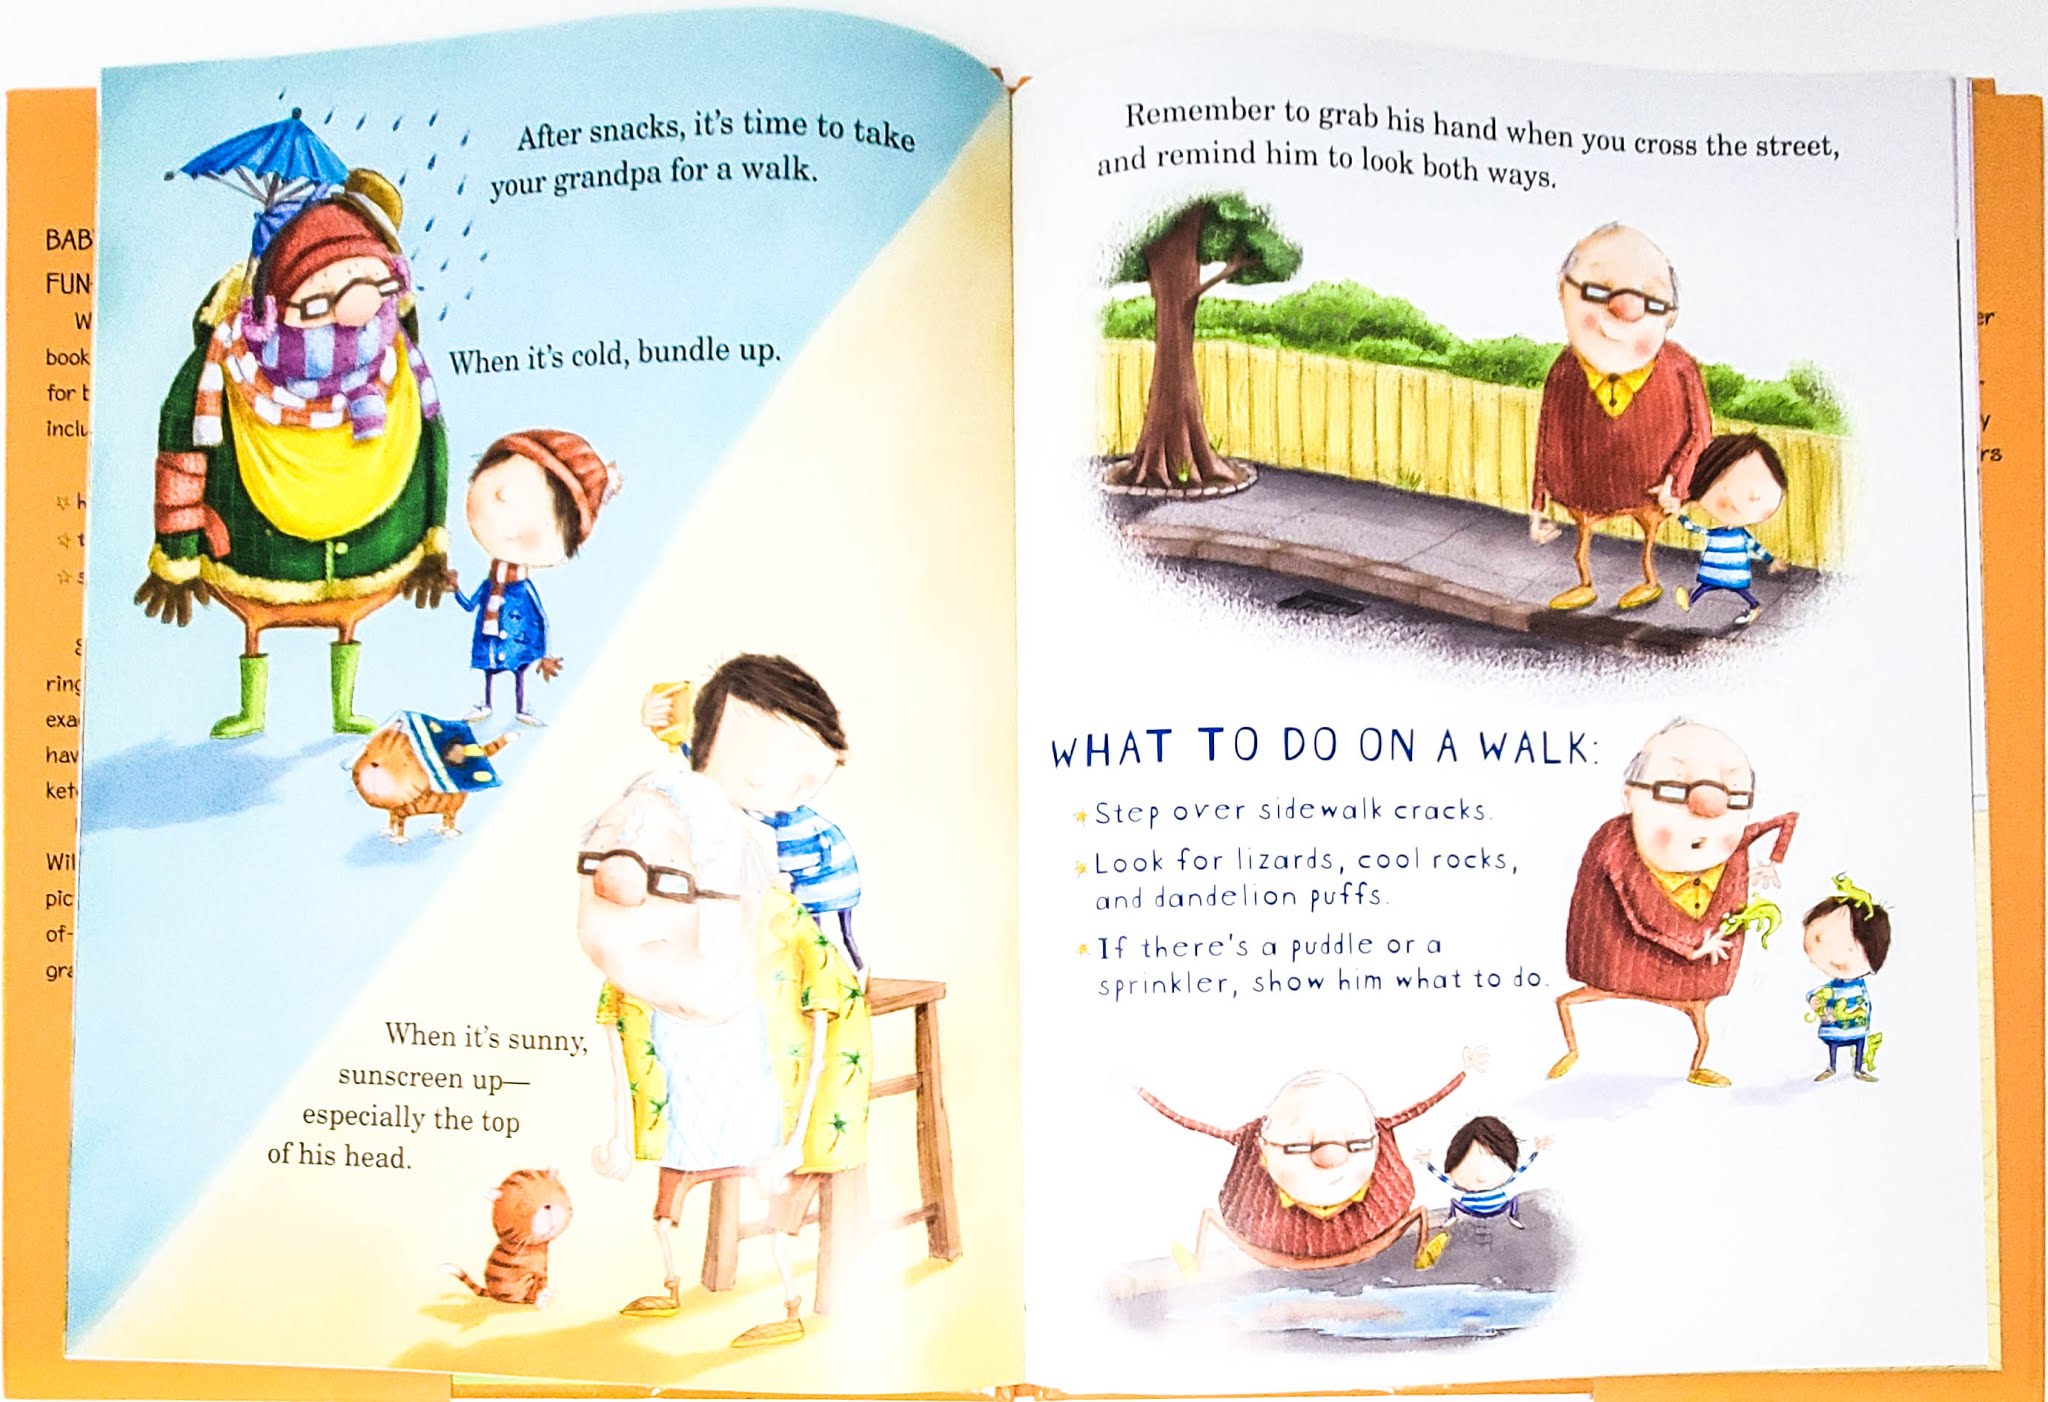 How to Babysit a Grandpa - an excellent mentor text for writing how-to books.